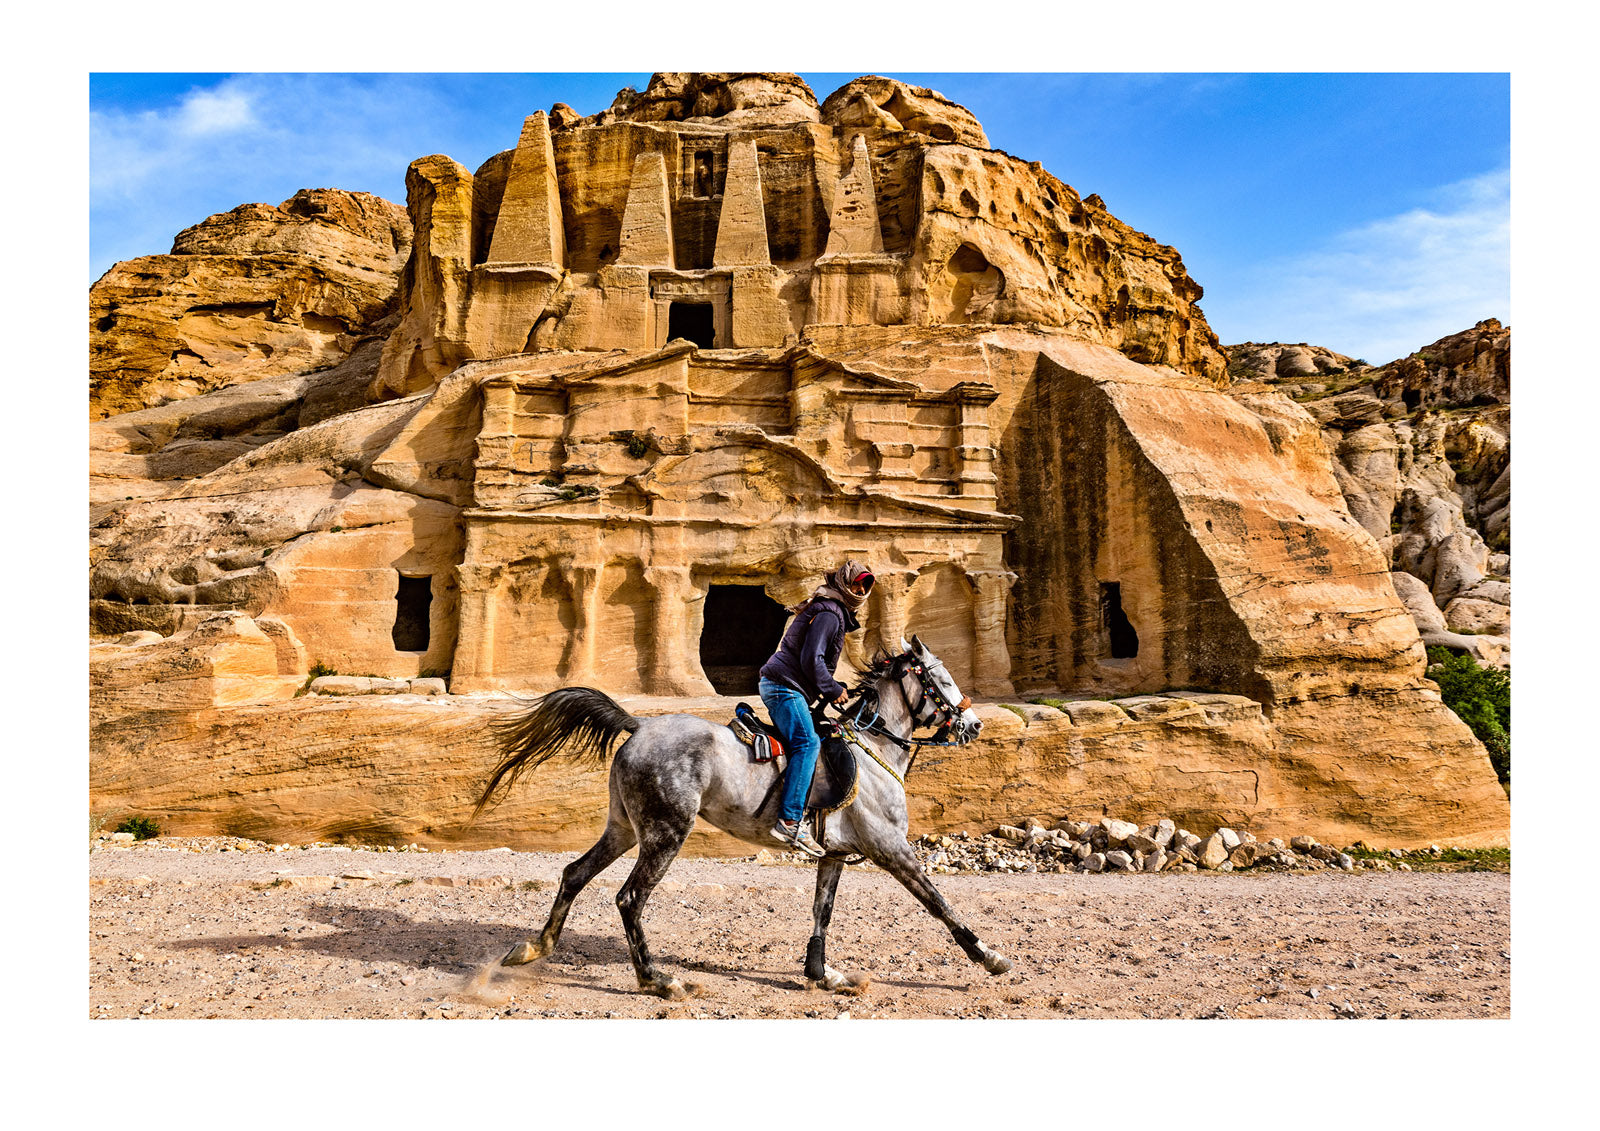 A Bedouin man galloping on a horse past the ancient ruins of the Obelisk Tomb, above, and Bab as-Siq Triclinium, below, rock-cut architecture, 1st century AD. Petra, The Lost City of Petra, Jordan